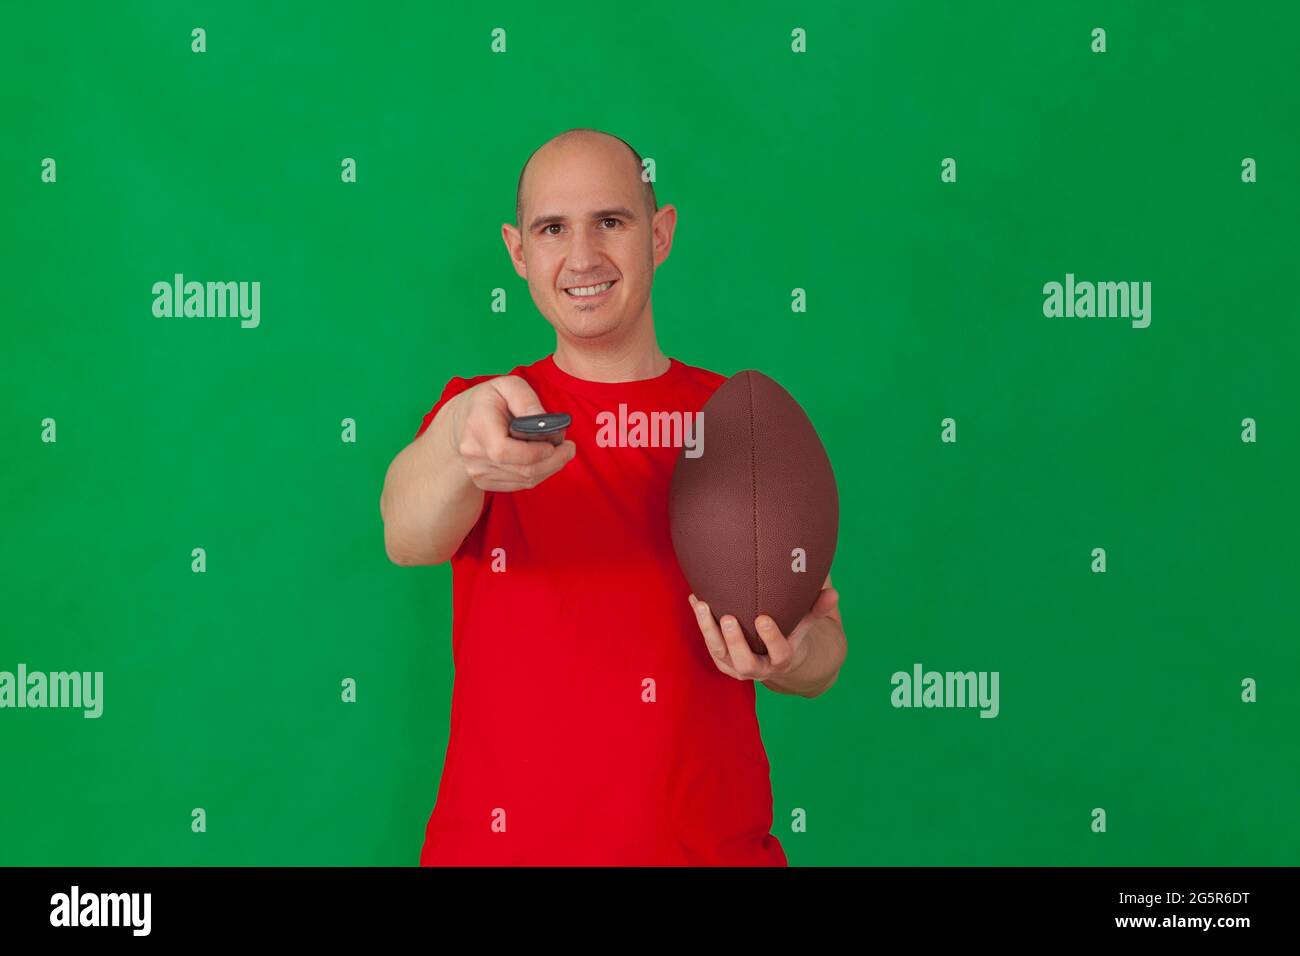 A bald caucasian man wearing a red t-shirt holds a soccer in his left hand and points a television remote control with his other hand. The background Stock Photo